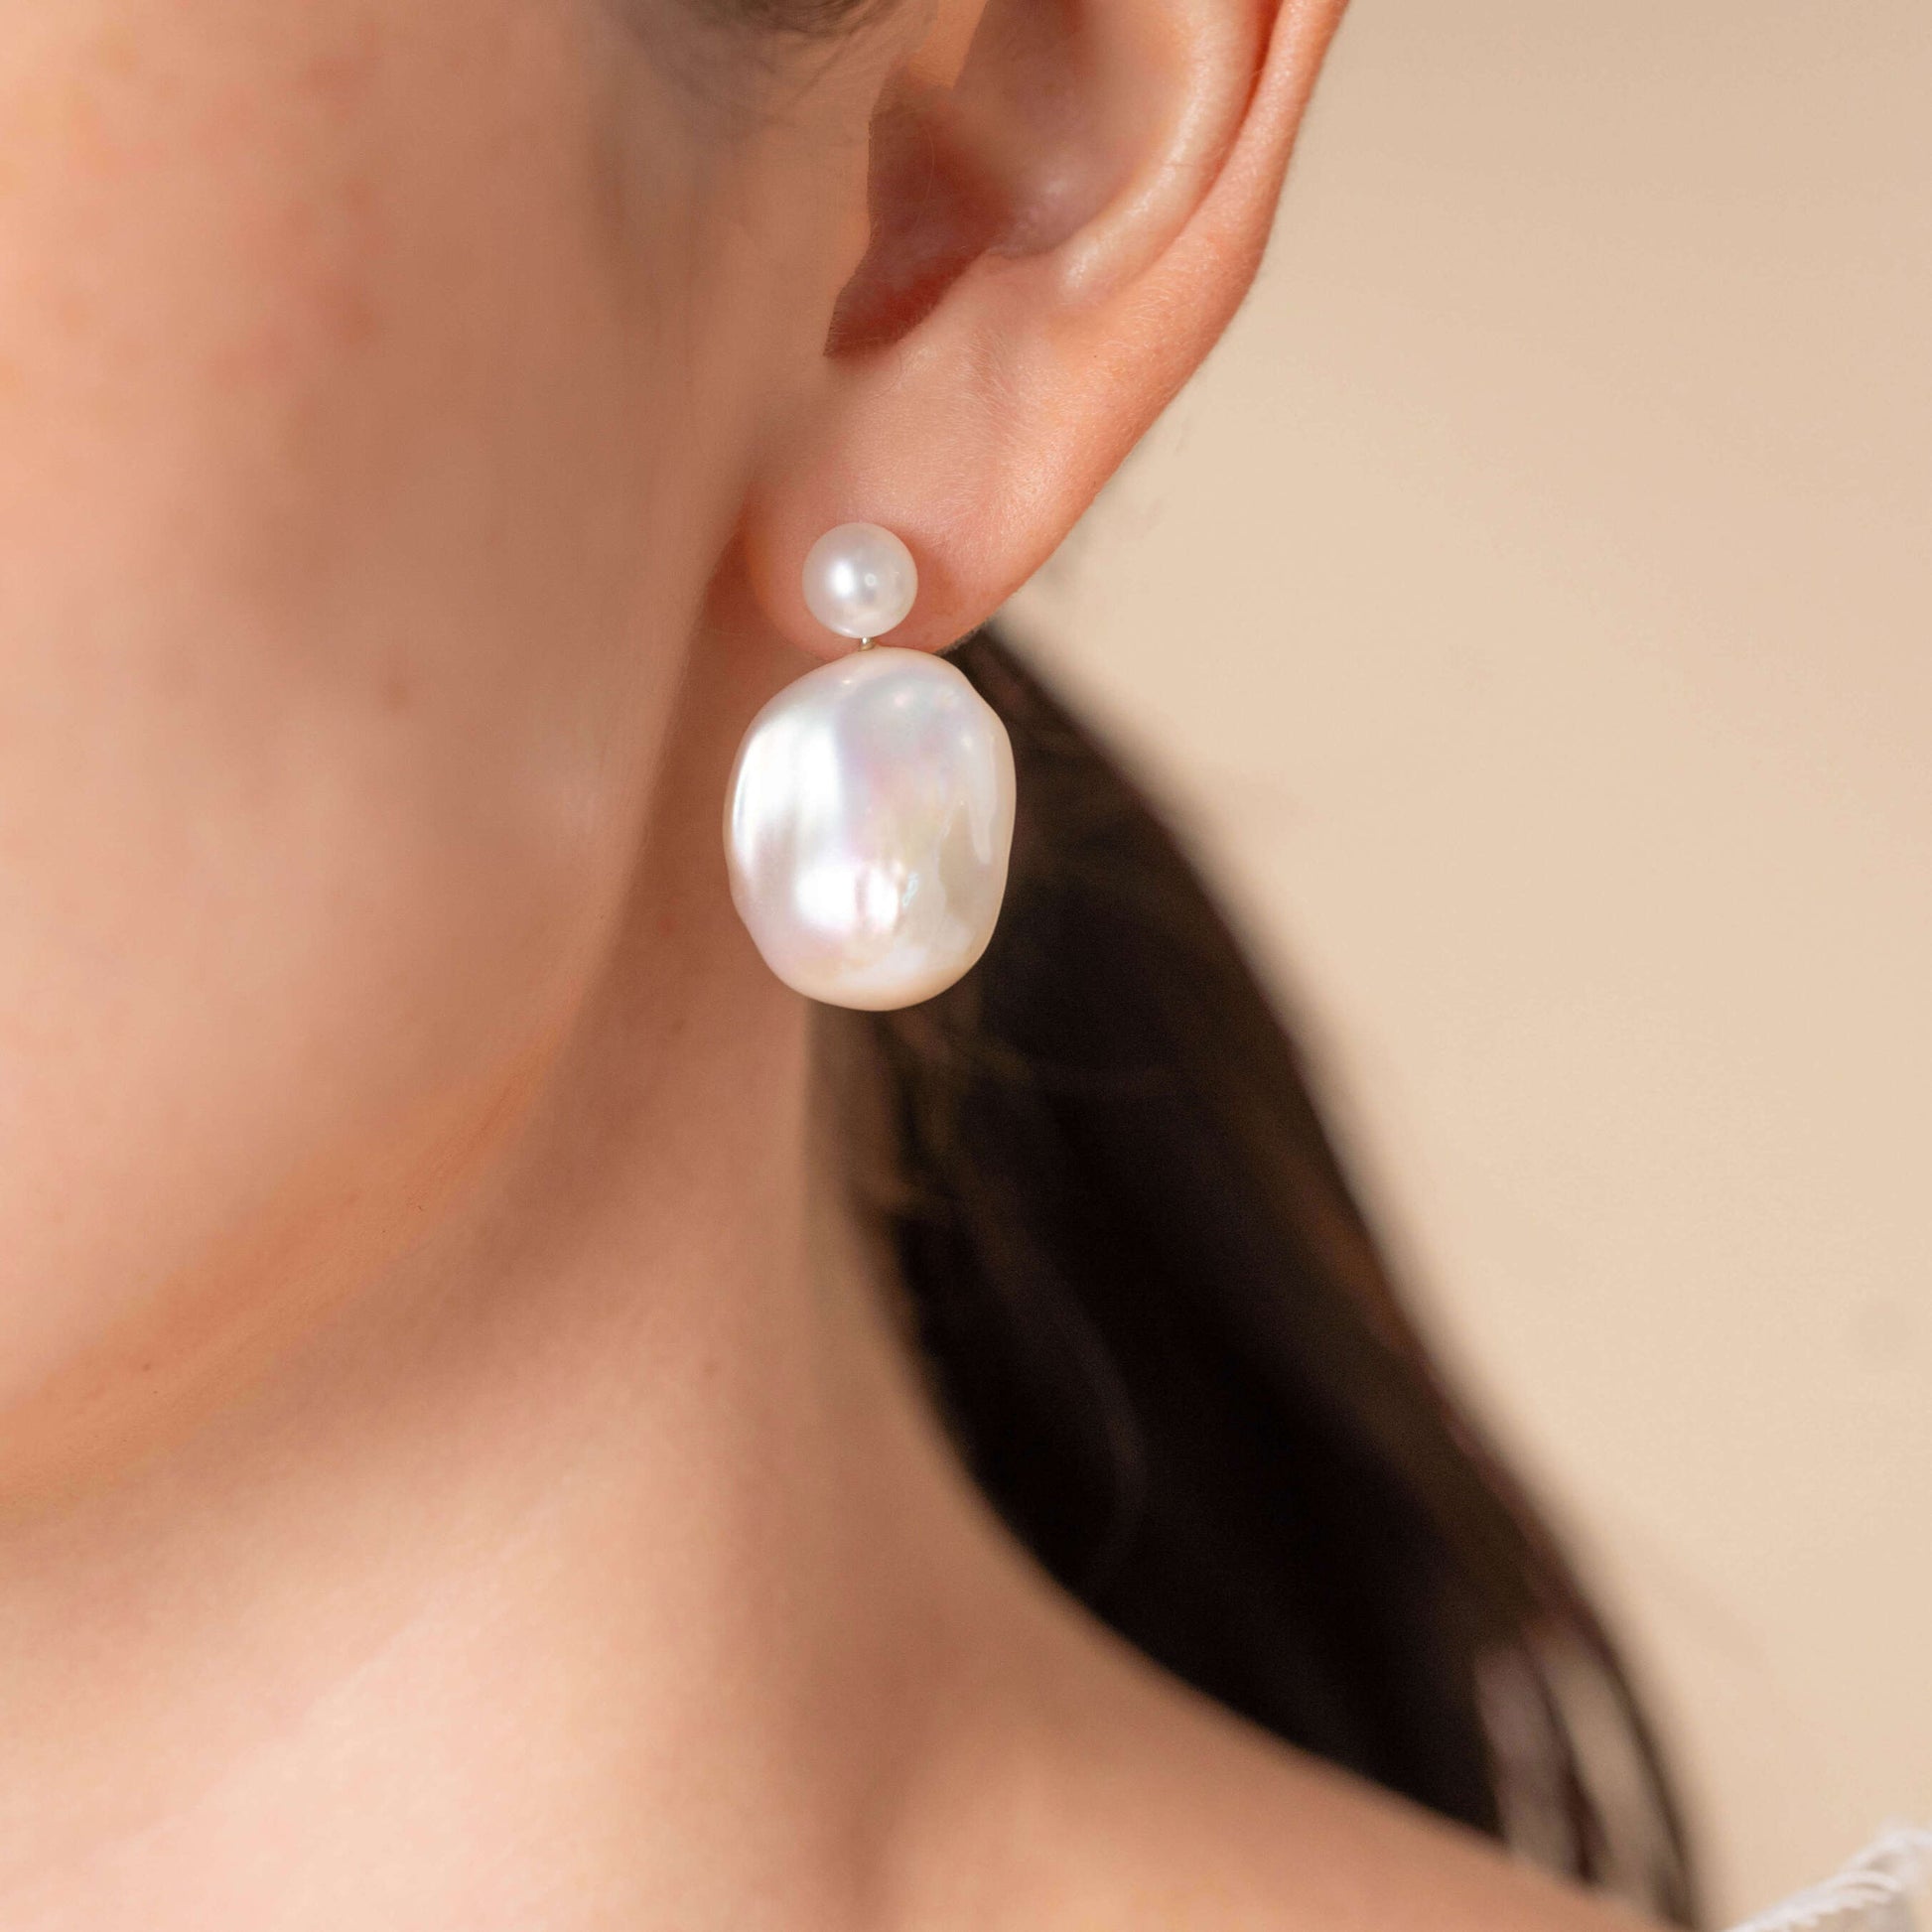 Enhance your style with a Baroque Pearl Charm Piercing worn by a woman with a pearl earring.